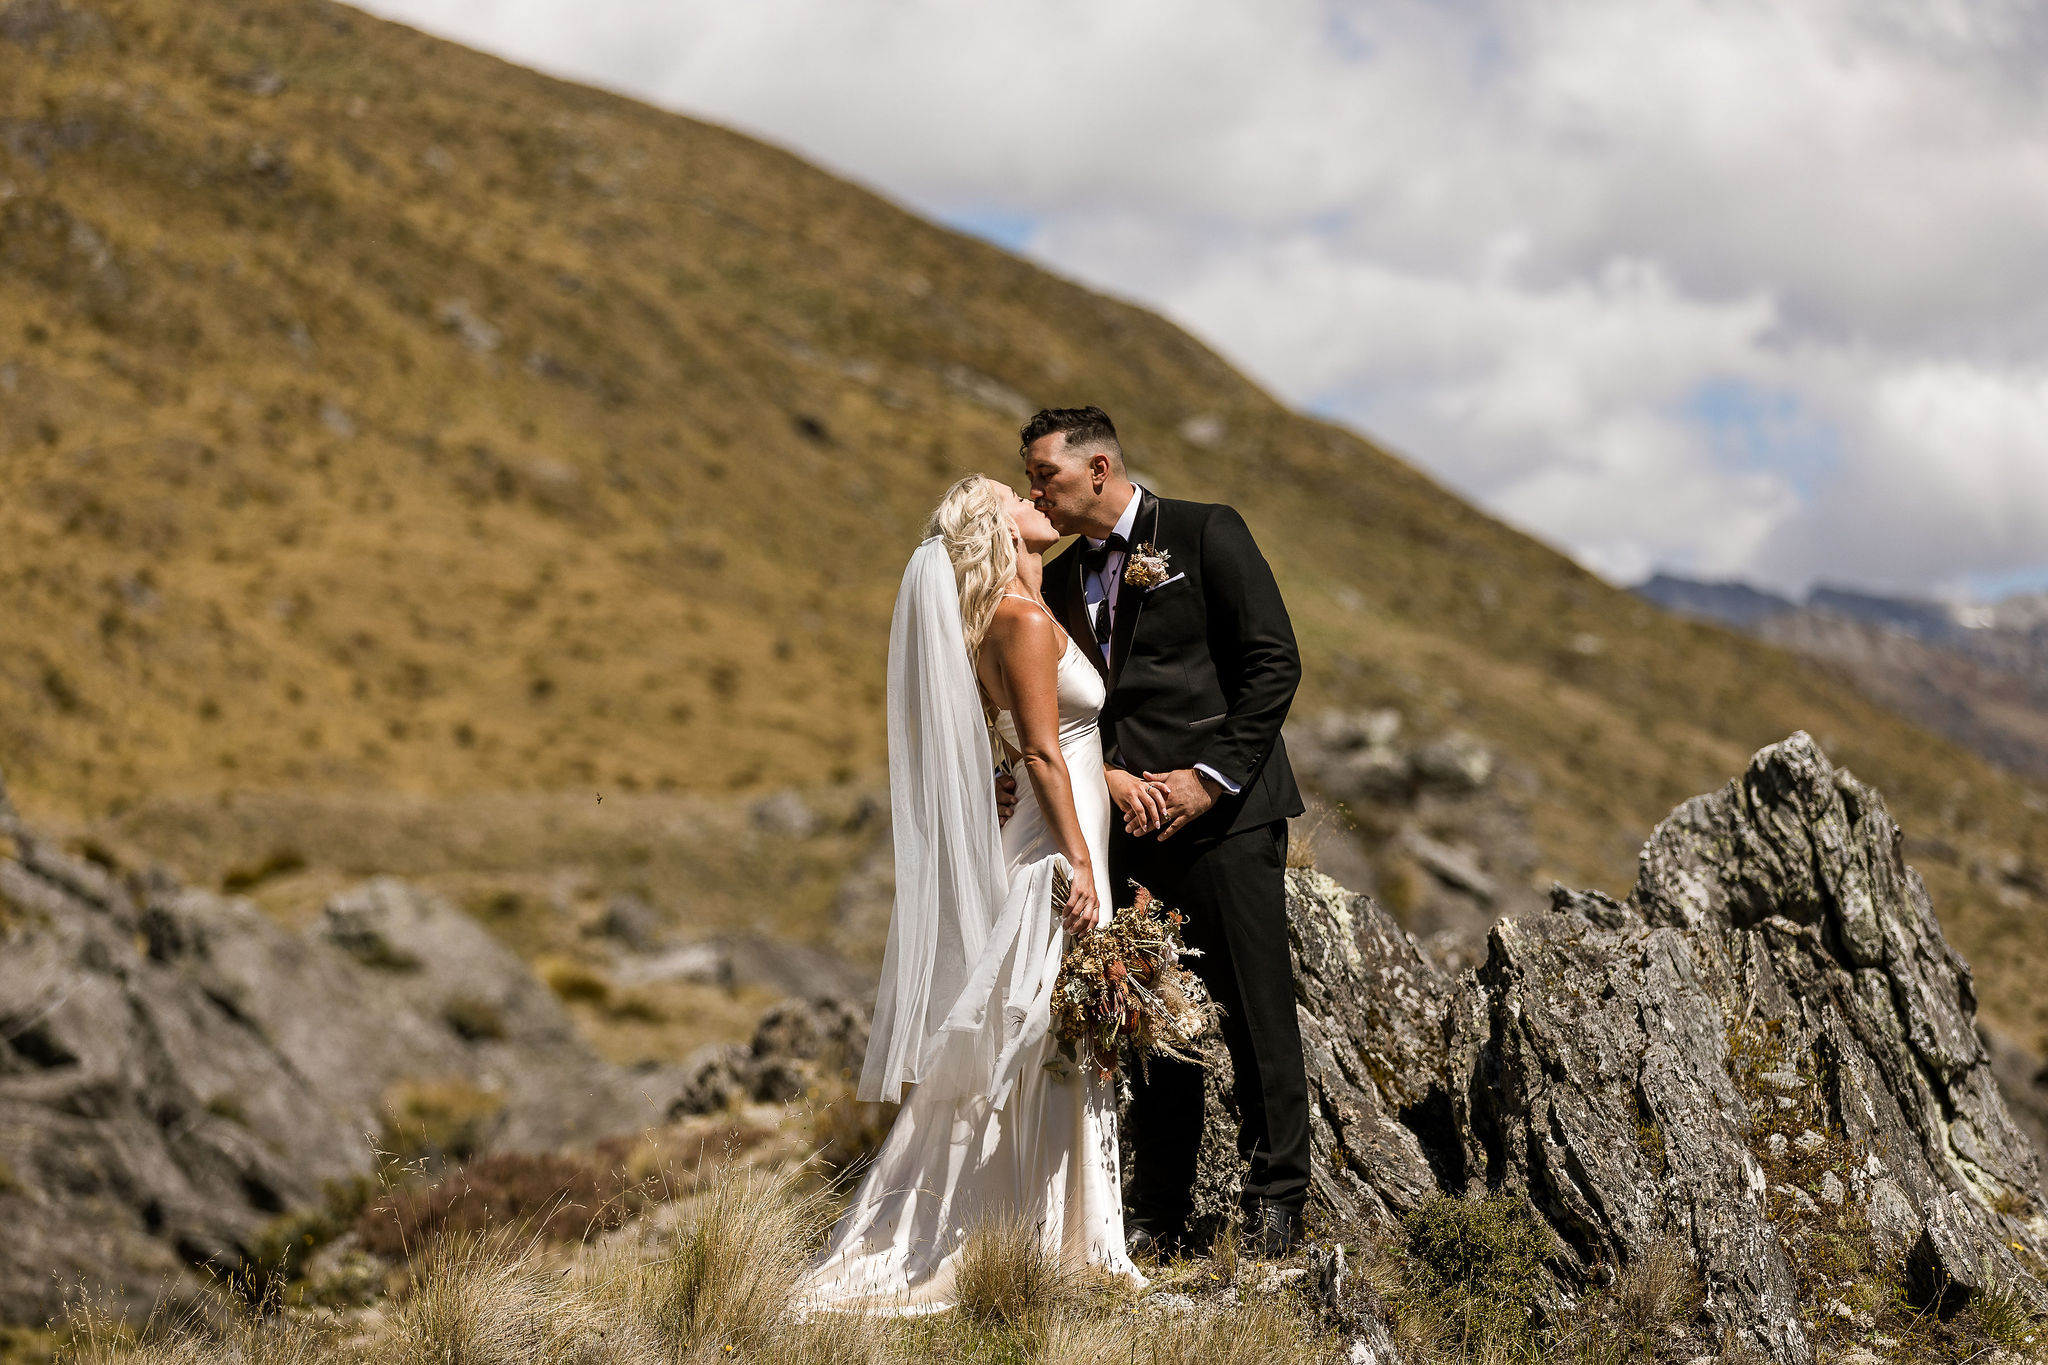 Rees Valley Tarns - perfect elopement wedding location